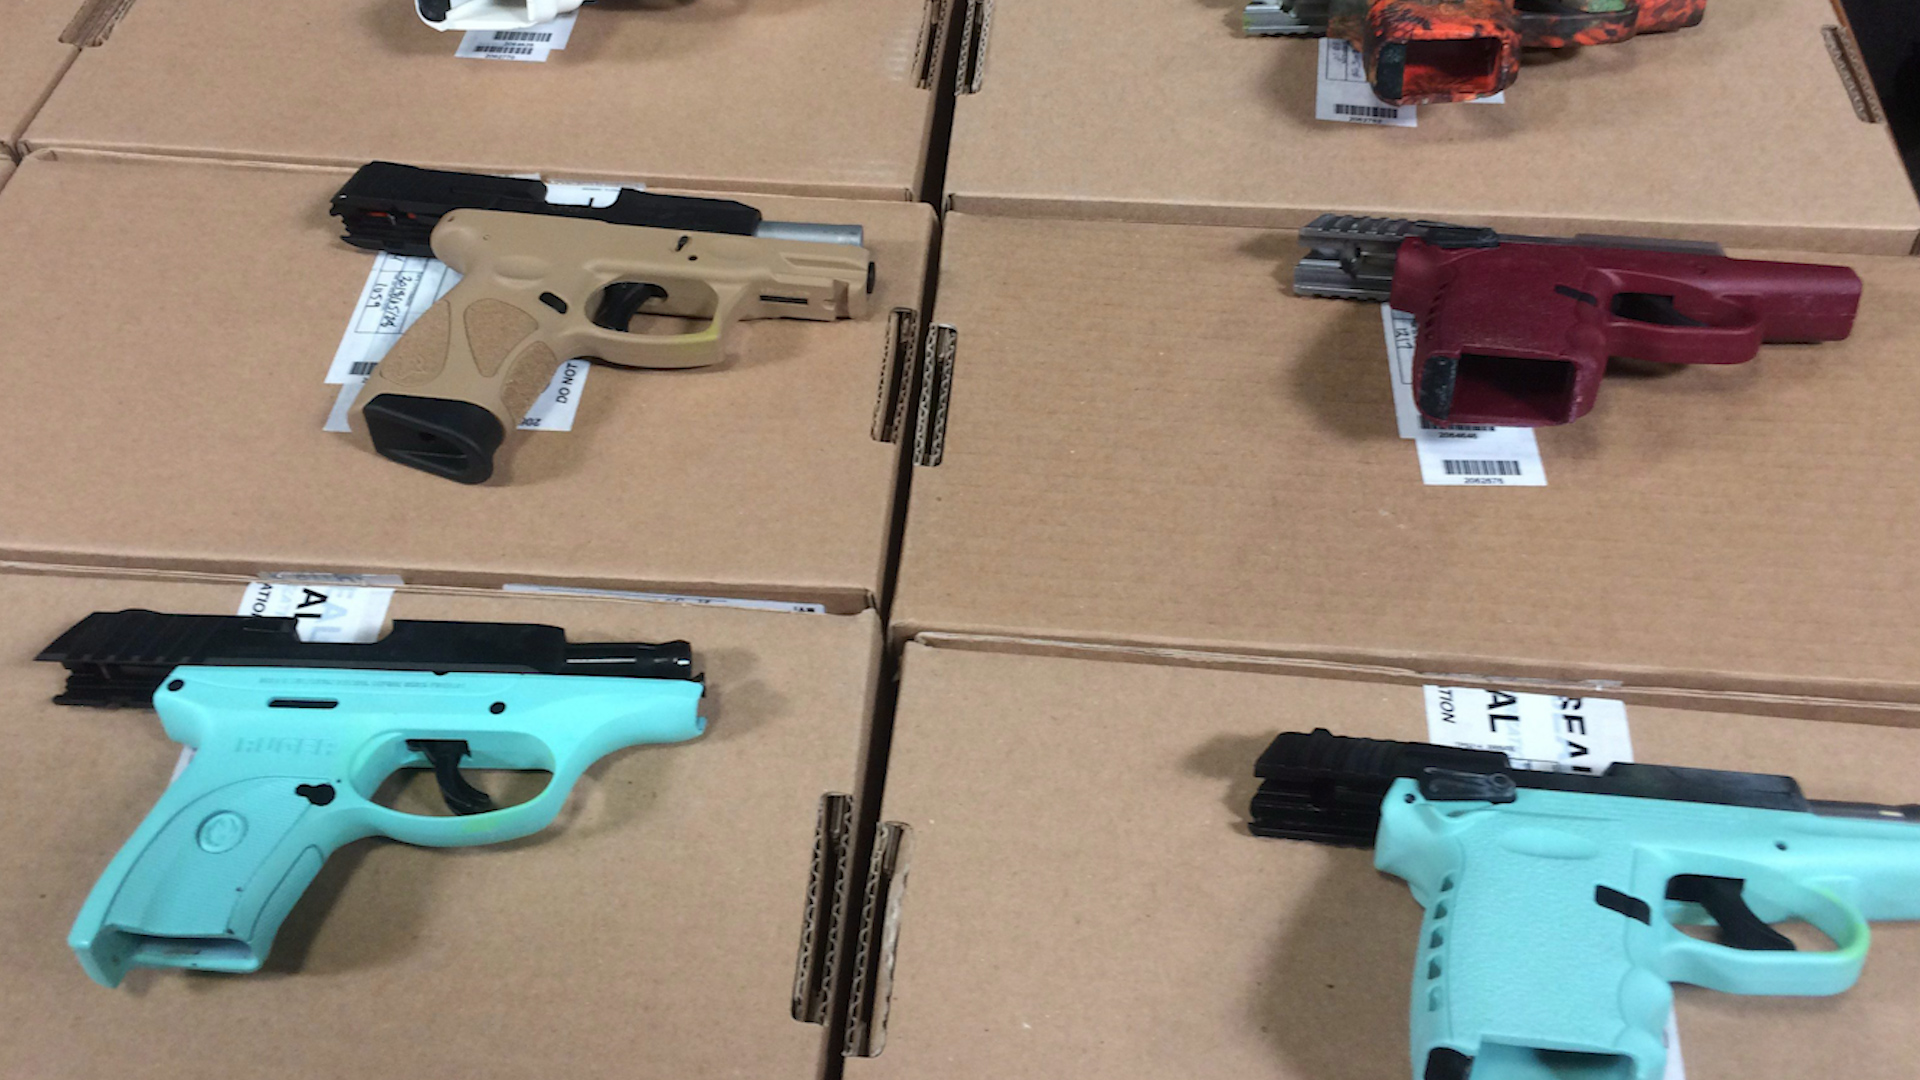 Toronto police show off dozens of guns confiscated in raid